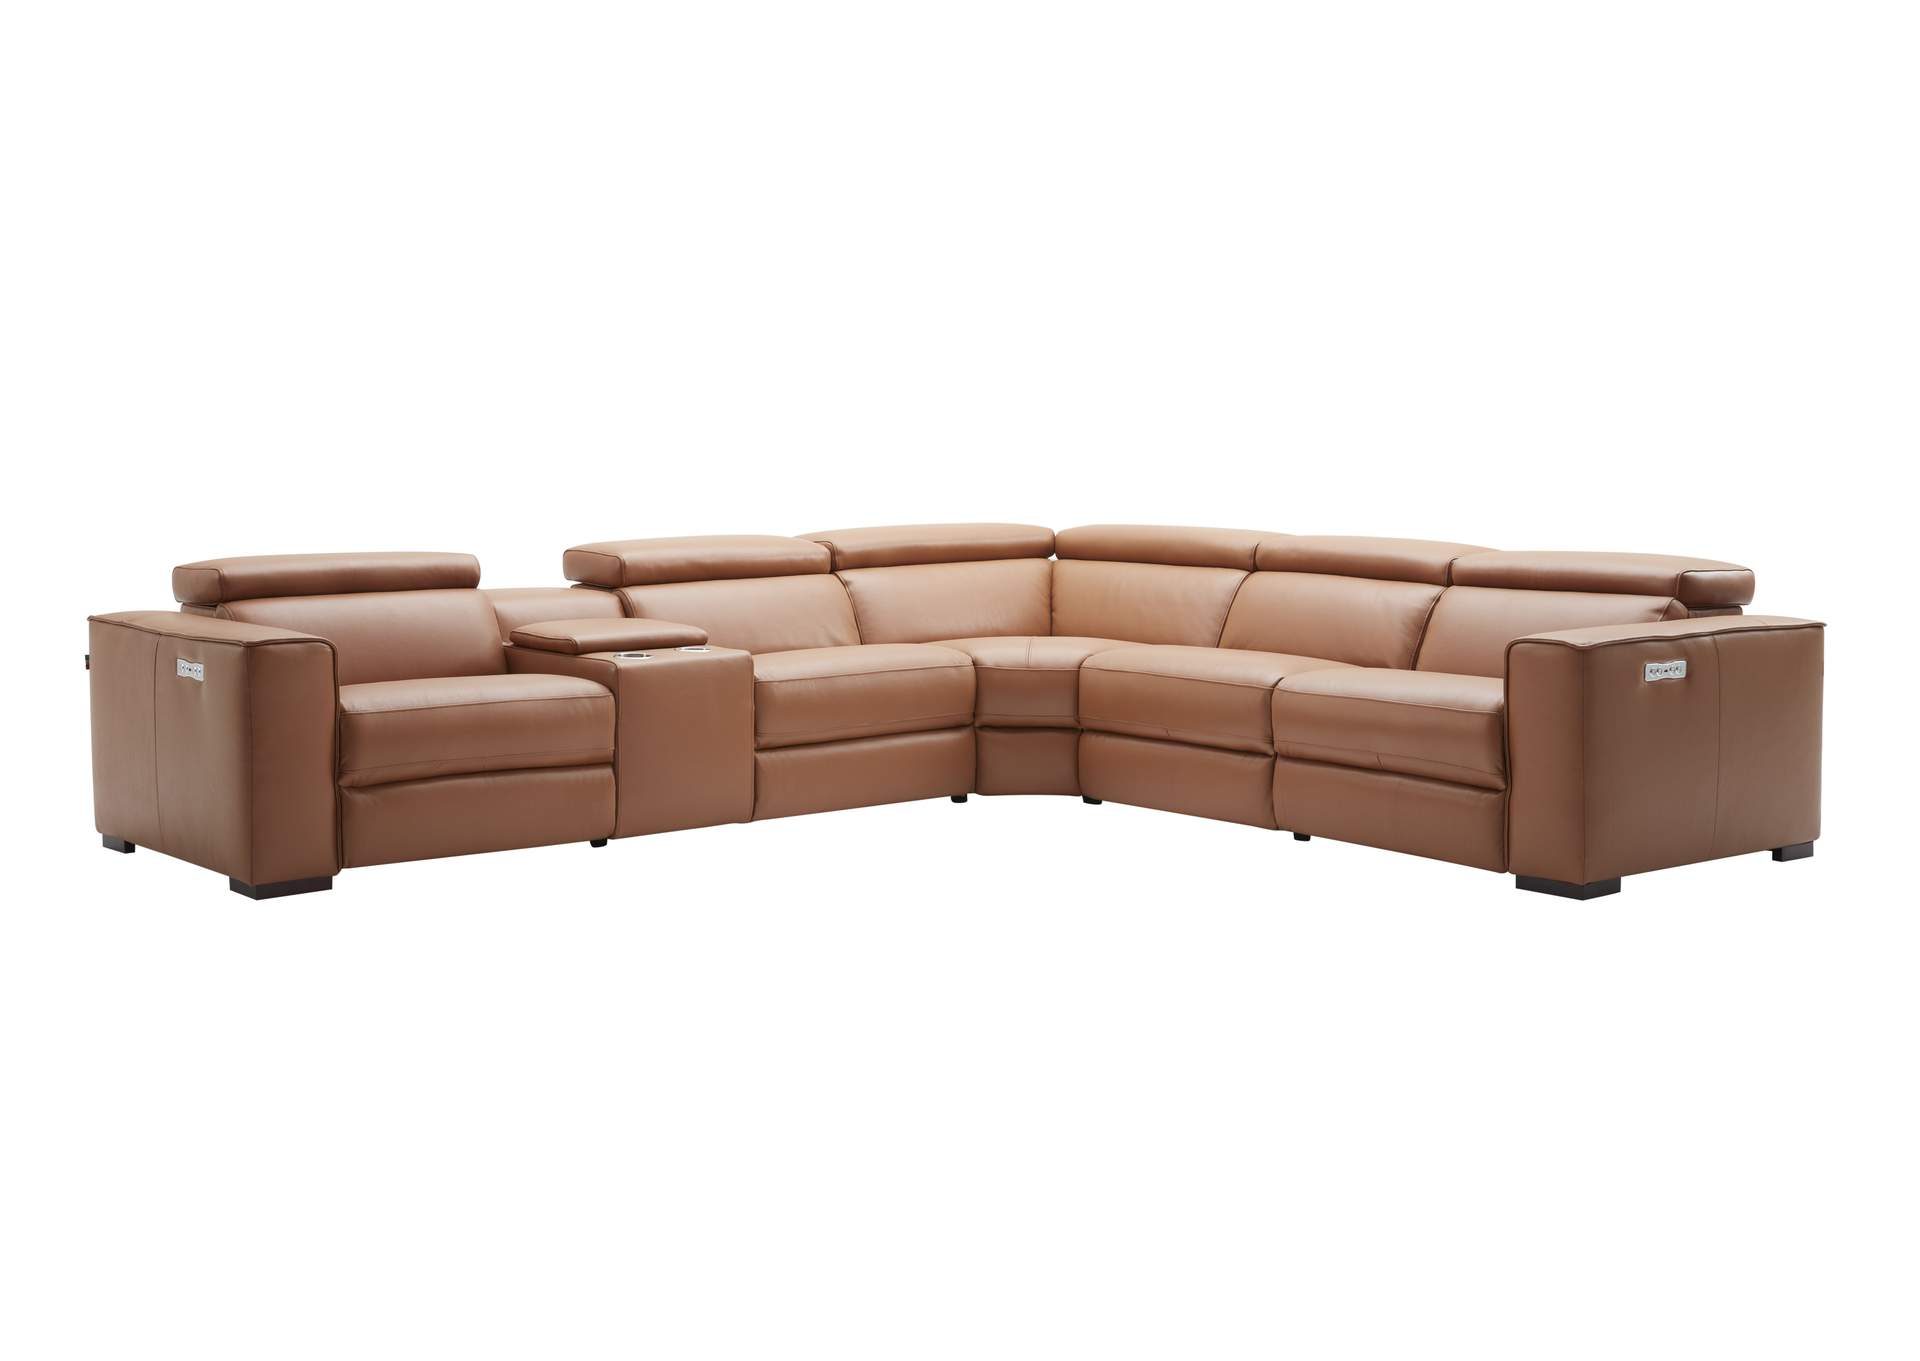 Picasso Motion Sectional In Caramel,J&M Furniture